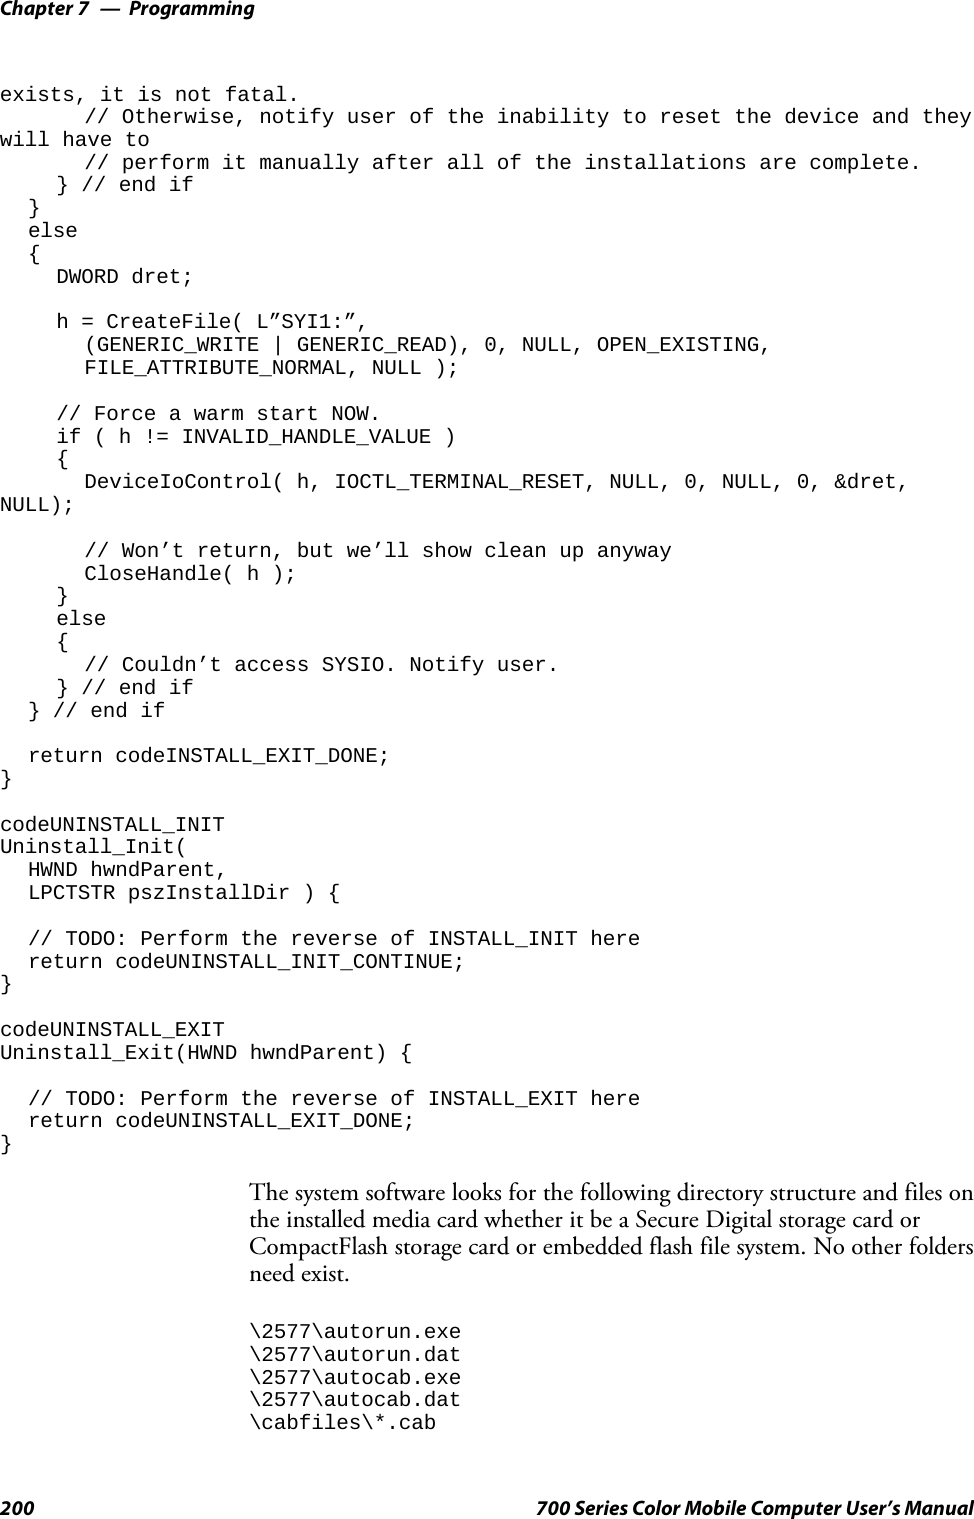 ProgrammingChapter —7200 700 Series Color Mobile Computer User’s Manualexists, it is not fatal.// Otherwise, notify user of the inability to reset the device and theywill have to// perform it manually after all of the installations are complete.} // end if}else{DWORD dret;h = CreateFile( L”SYI1:”,(GENERIC_WRITE | GENERIC_READ), 0, NULL, OPEN_EXISTING,FILE_ATTRIBUTE_NORMAL, NULL );// Force a warm start NOW.if(h!=INVALID_HANDLE_VALUE ){DeviceIoControl( h, IOCTL_TERMINAL_RESET, NULL, 0, NULL, 0, &amp;dret,NULL);// Won’t return, but we’ll show clean up anywayCloseHandle( h );}else{// Couldn’t access SYSIO. Notify user.} // end if} // end ifreturn codeINSTALL_EXIT_DONE;}codeUNINSTALL_INITUninstall_Init(HWND hwndParent,LPCTSTR pszInstallDir ) {// TODO: Perform the reverse of INSTALL_INIT herereturn codeUNINSTALL_INIT_CONTINUE;}codeUNINSTALL_EXITUninstall_Exit(HWND hwndParent) {// TODO: Perform the reverse of INSTALL_EXIT herereturn codeUNINSTALL_EXIT_DONE;}The system software looks for the following directory structure and files onthe installed media card whether it be a Secure Digital storage card orCompactFlash storage card or embedded flash file system. No other foldersneed exist.\2577\autorun.exe\2577\autorun.dat\2577\autocab.exe\2577\autocab.dat\cabfiles\*.cab